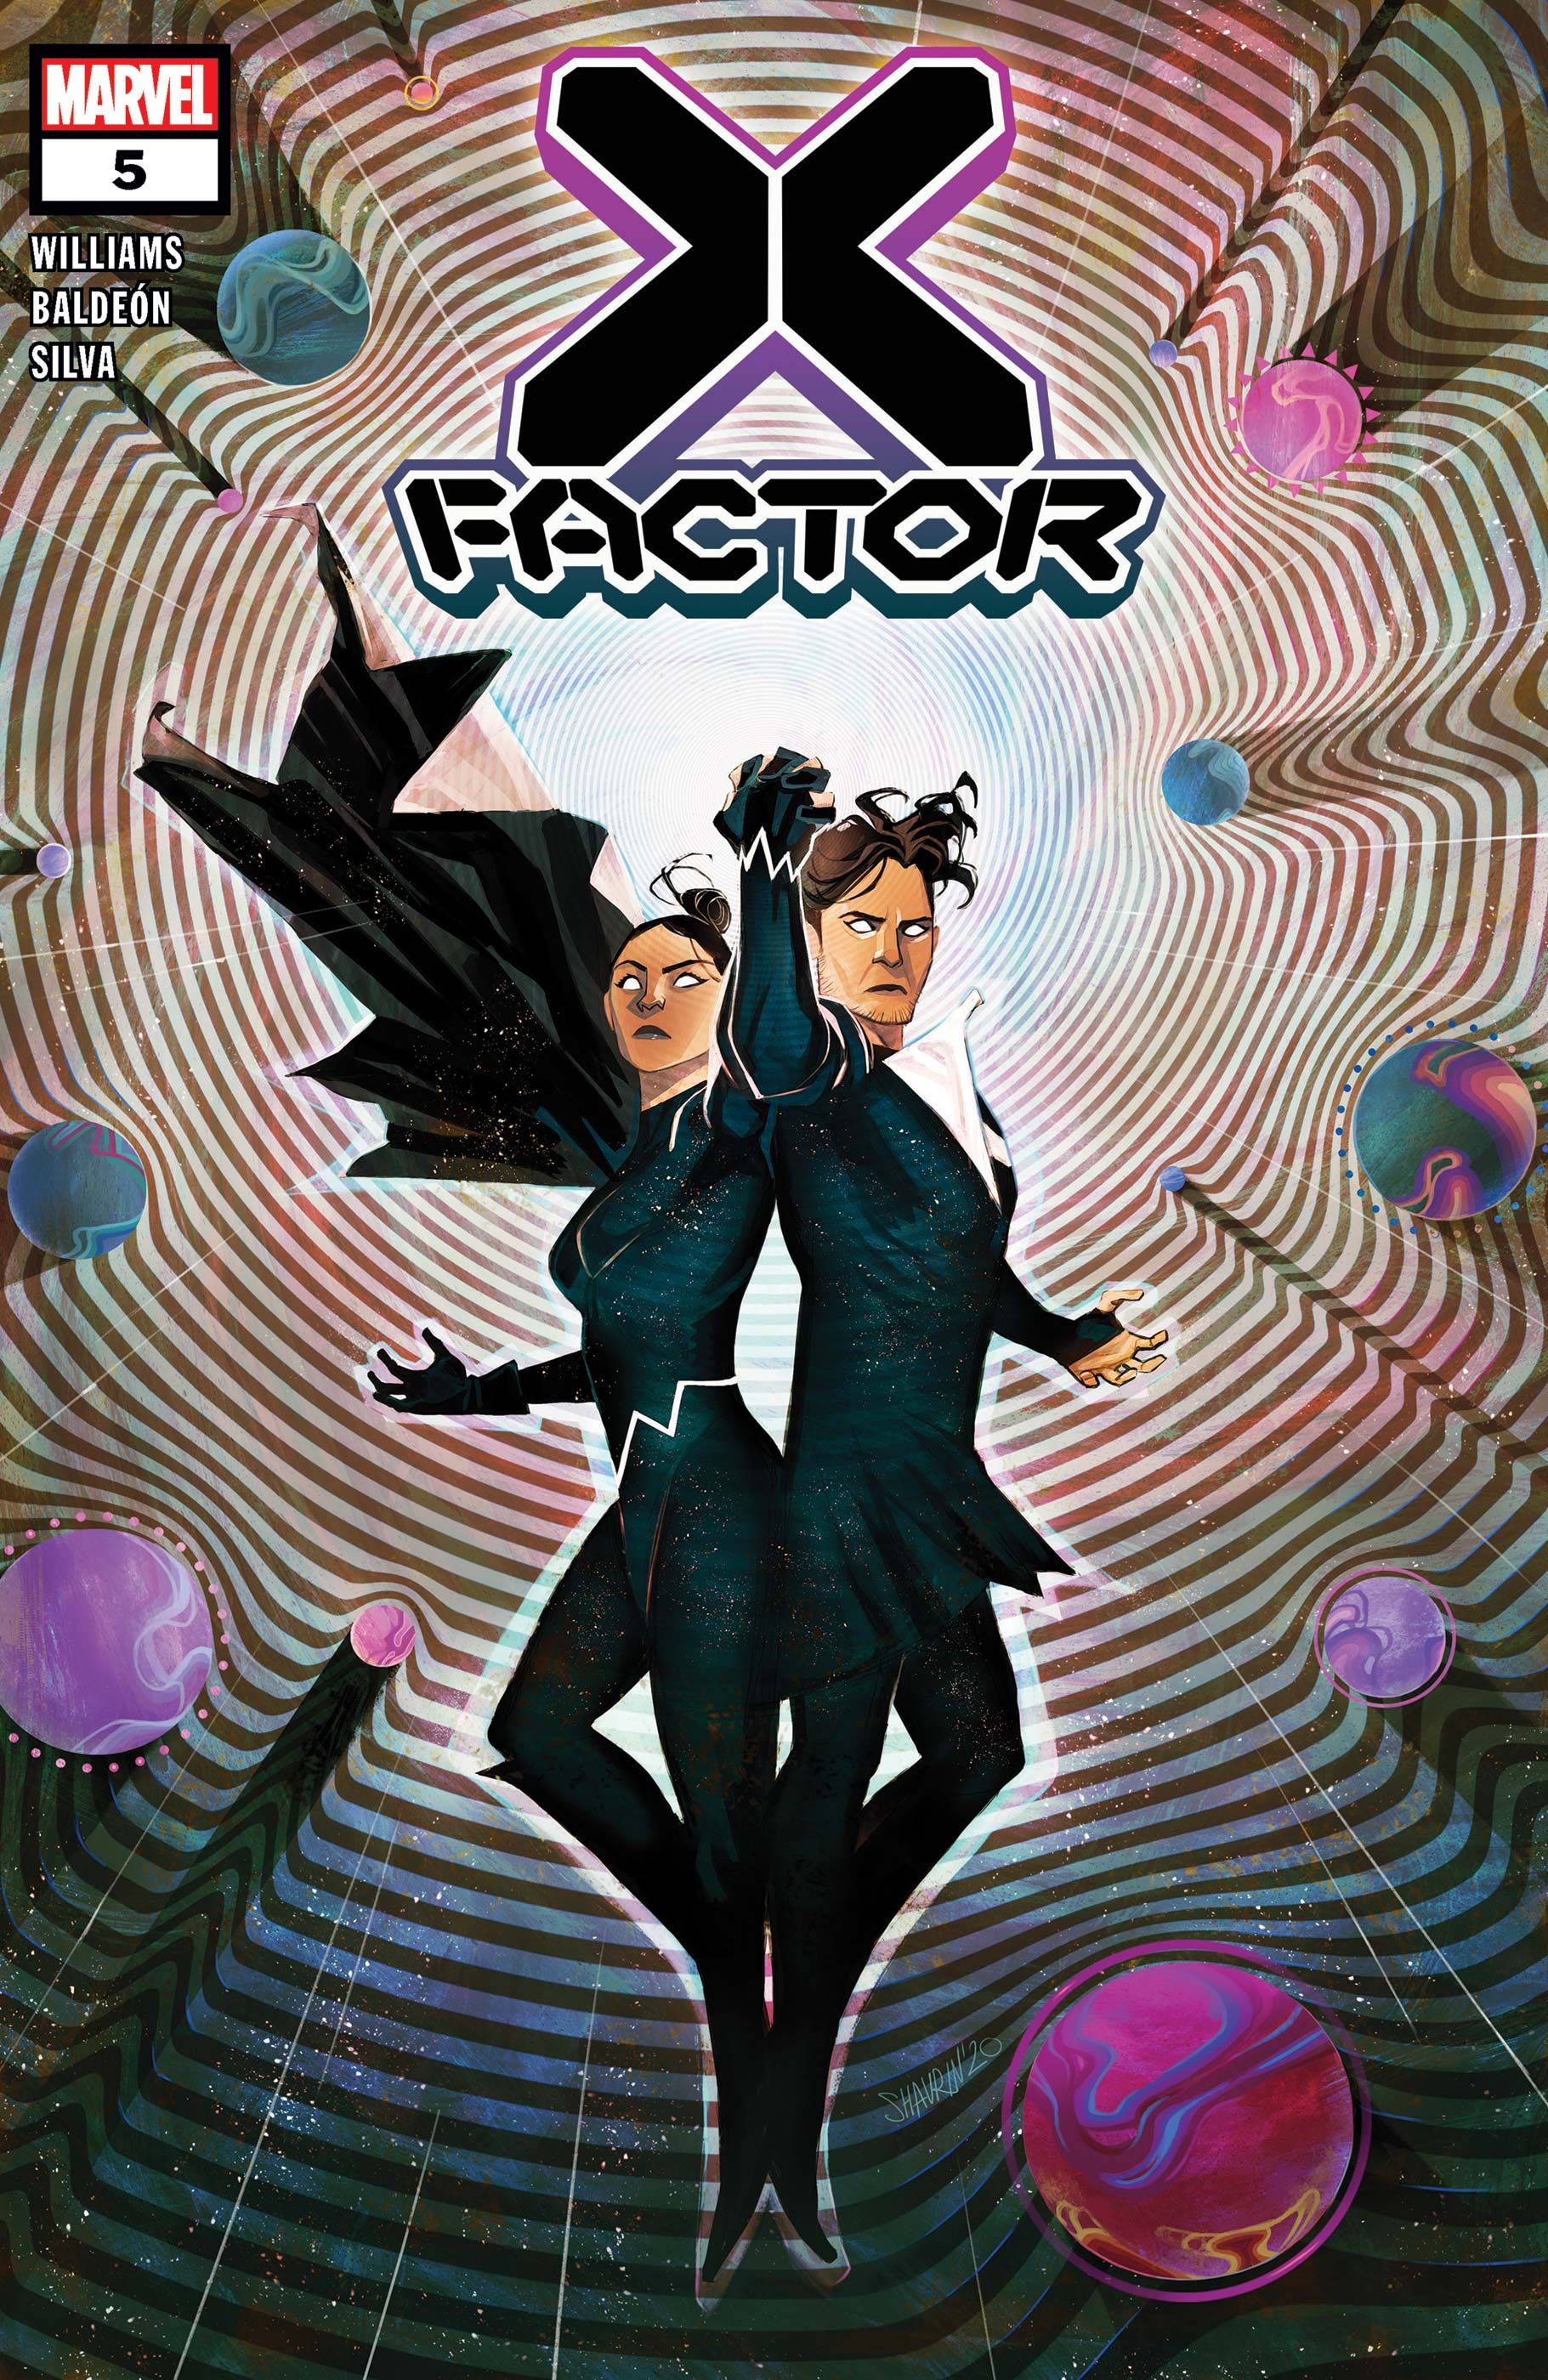 Ivan Shavrin's cover to X-Factor (2020) #5, featuring Aurora & Northstar